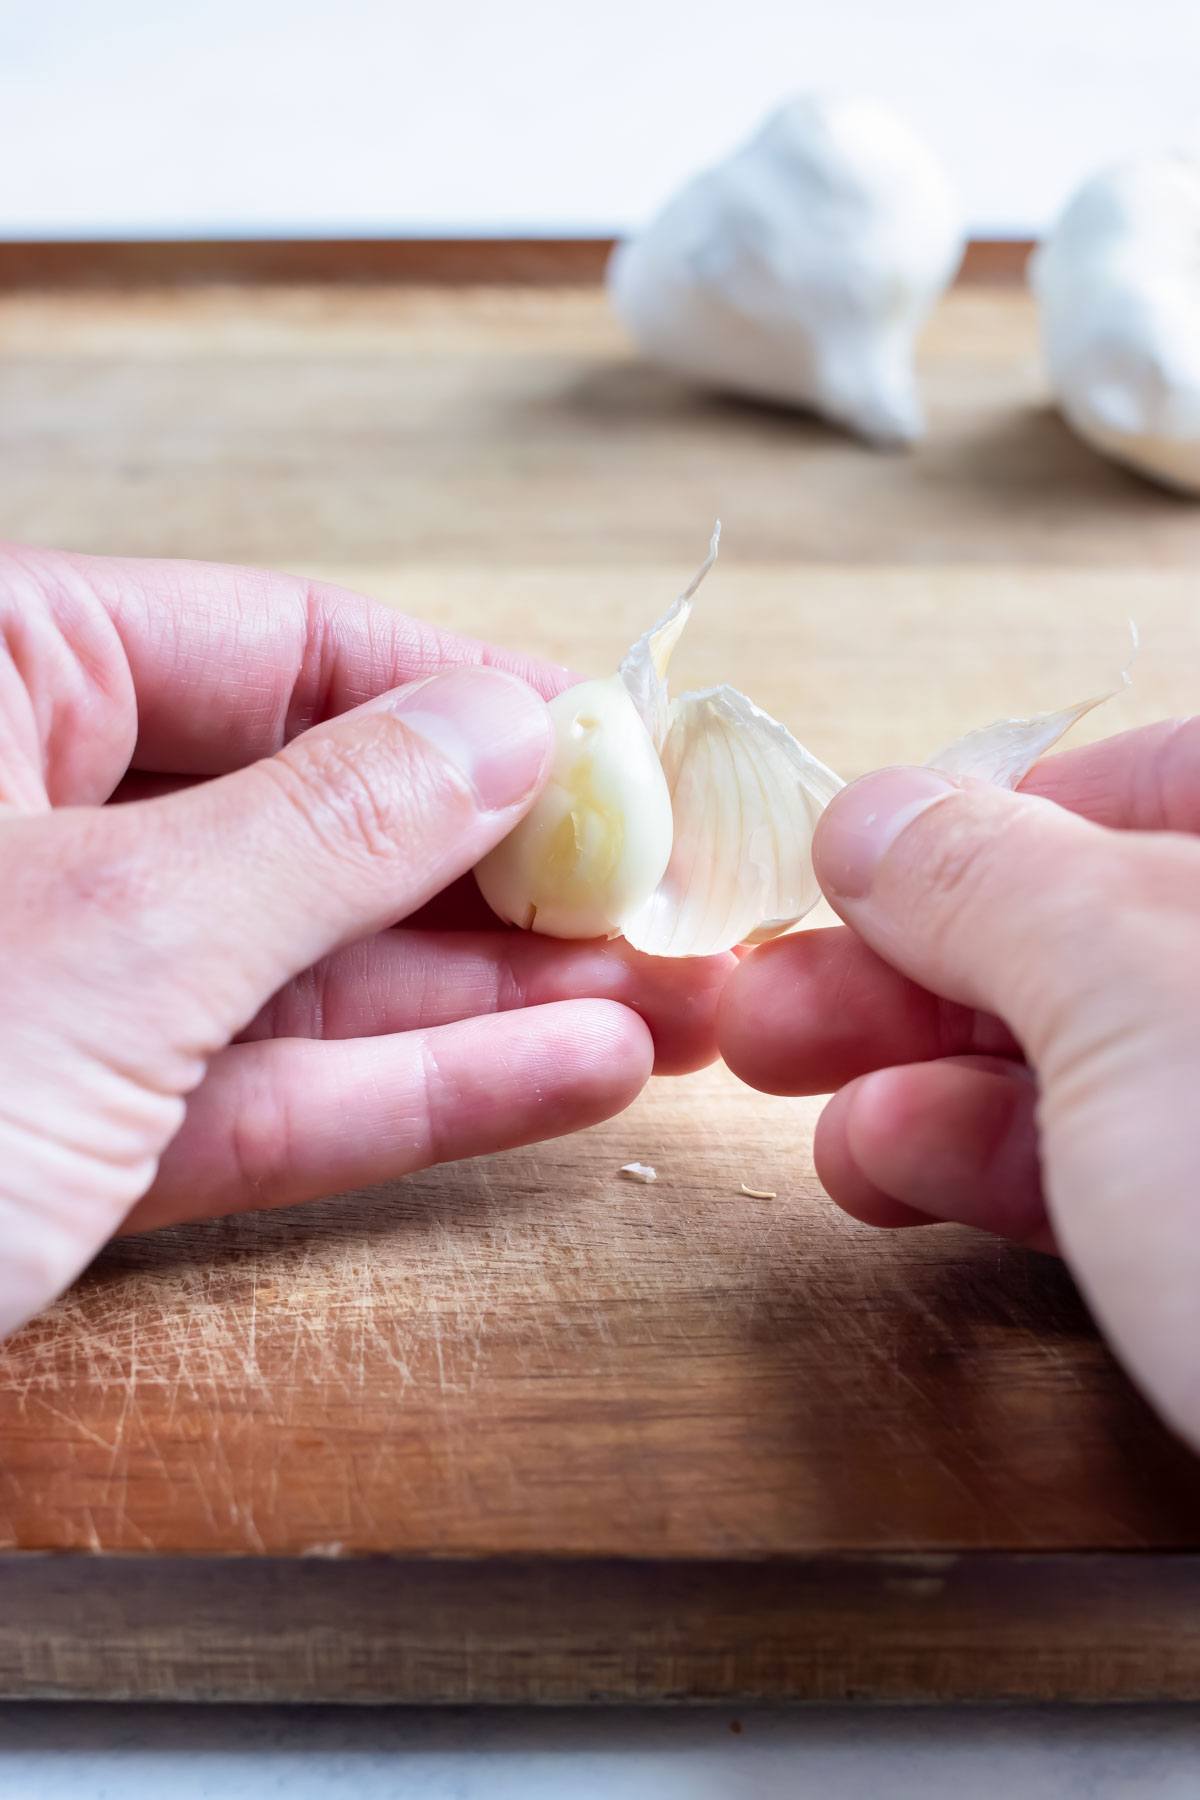 The skin is peeled from a garlic glove using your hands.